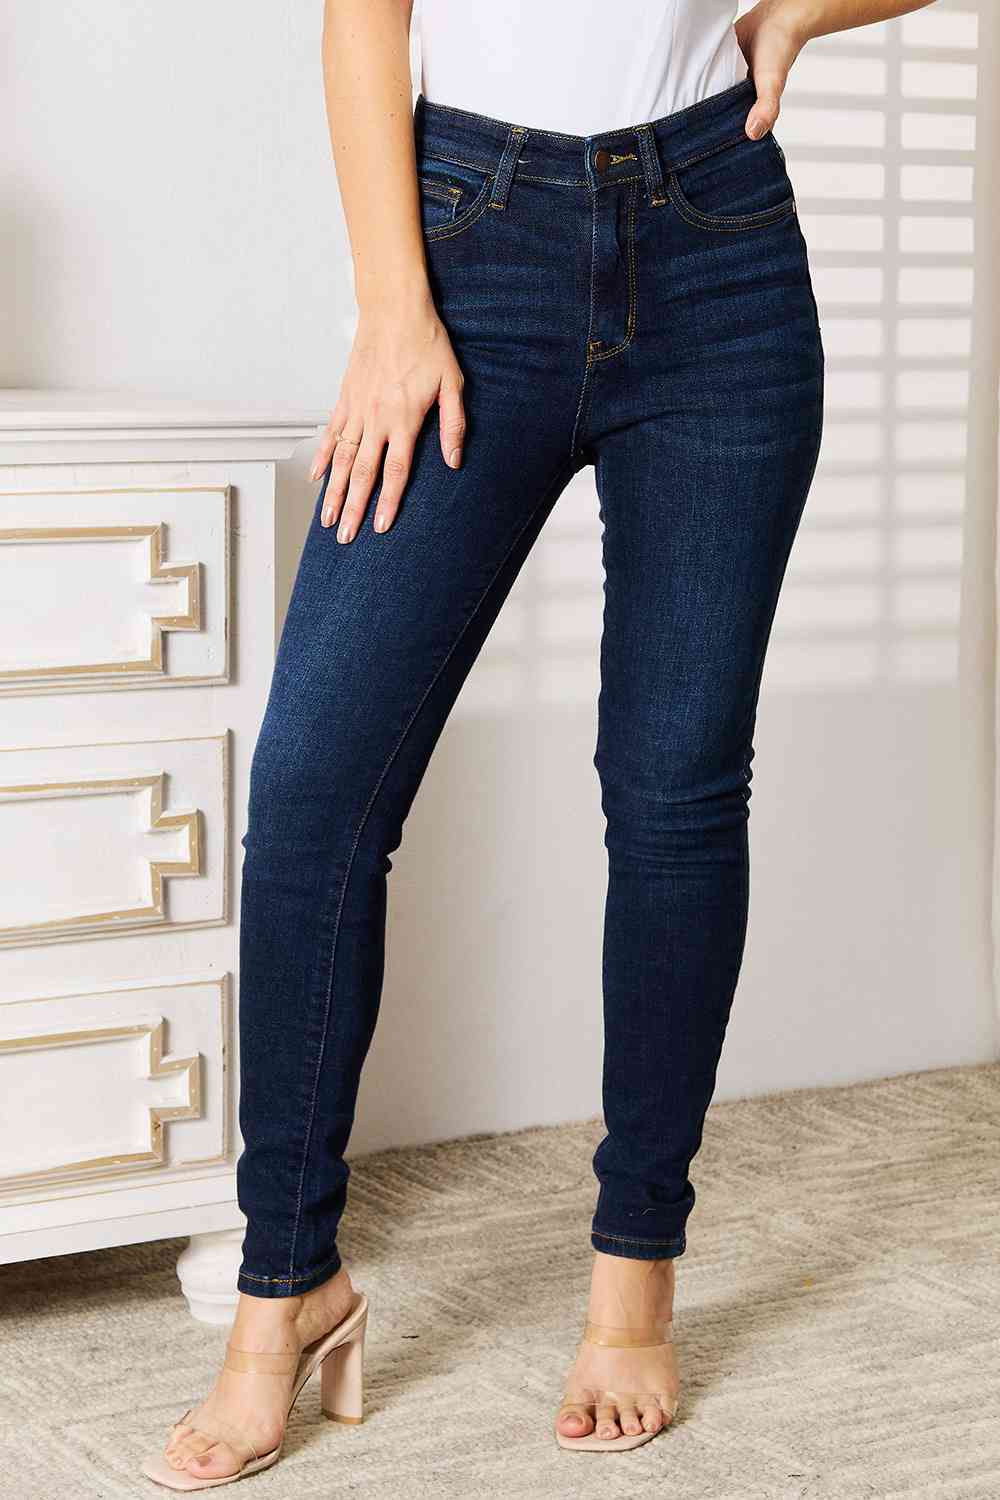 Judy Blue, High-Rise Handsand Skinny Jeans Style 82553